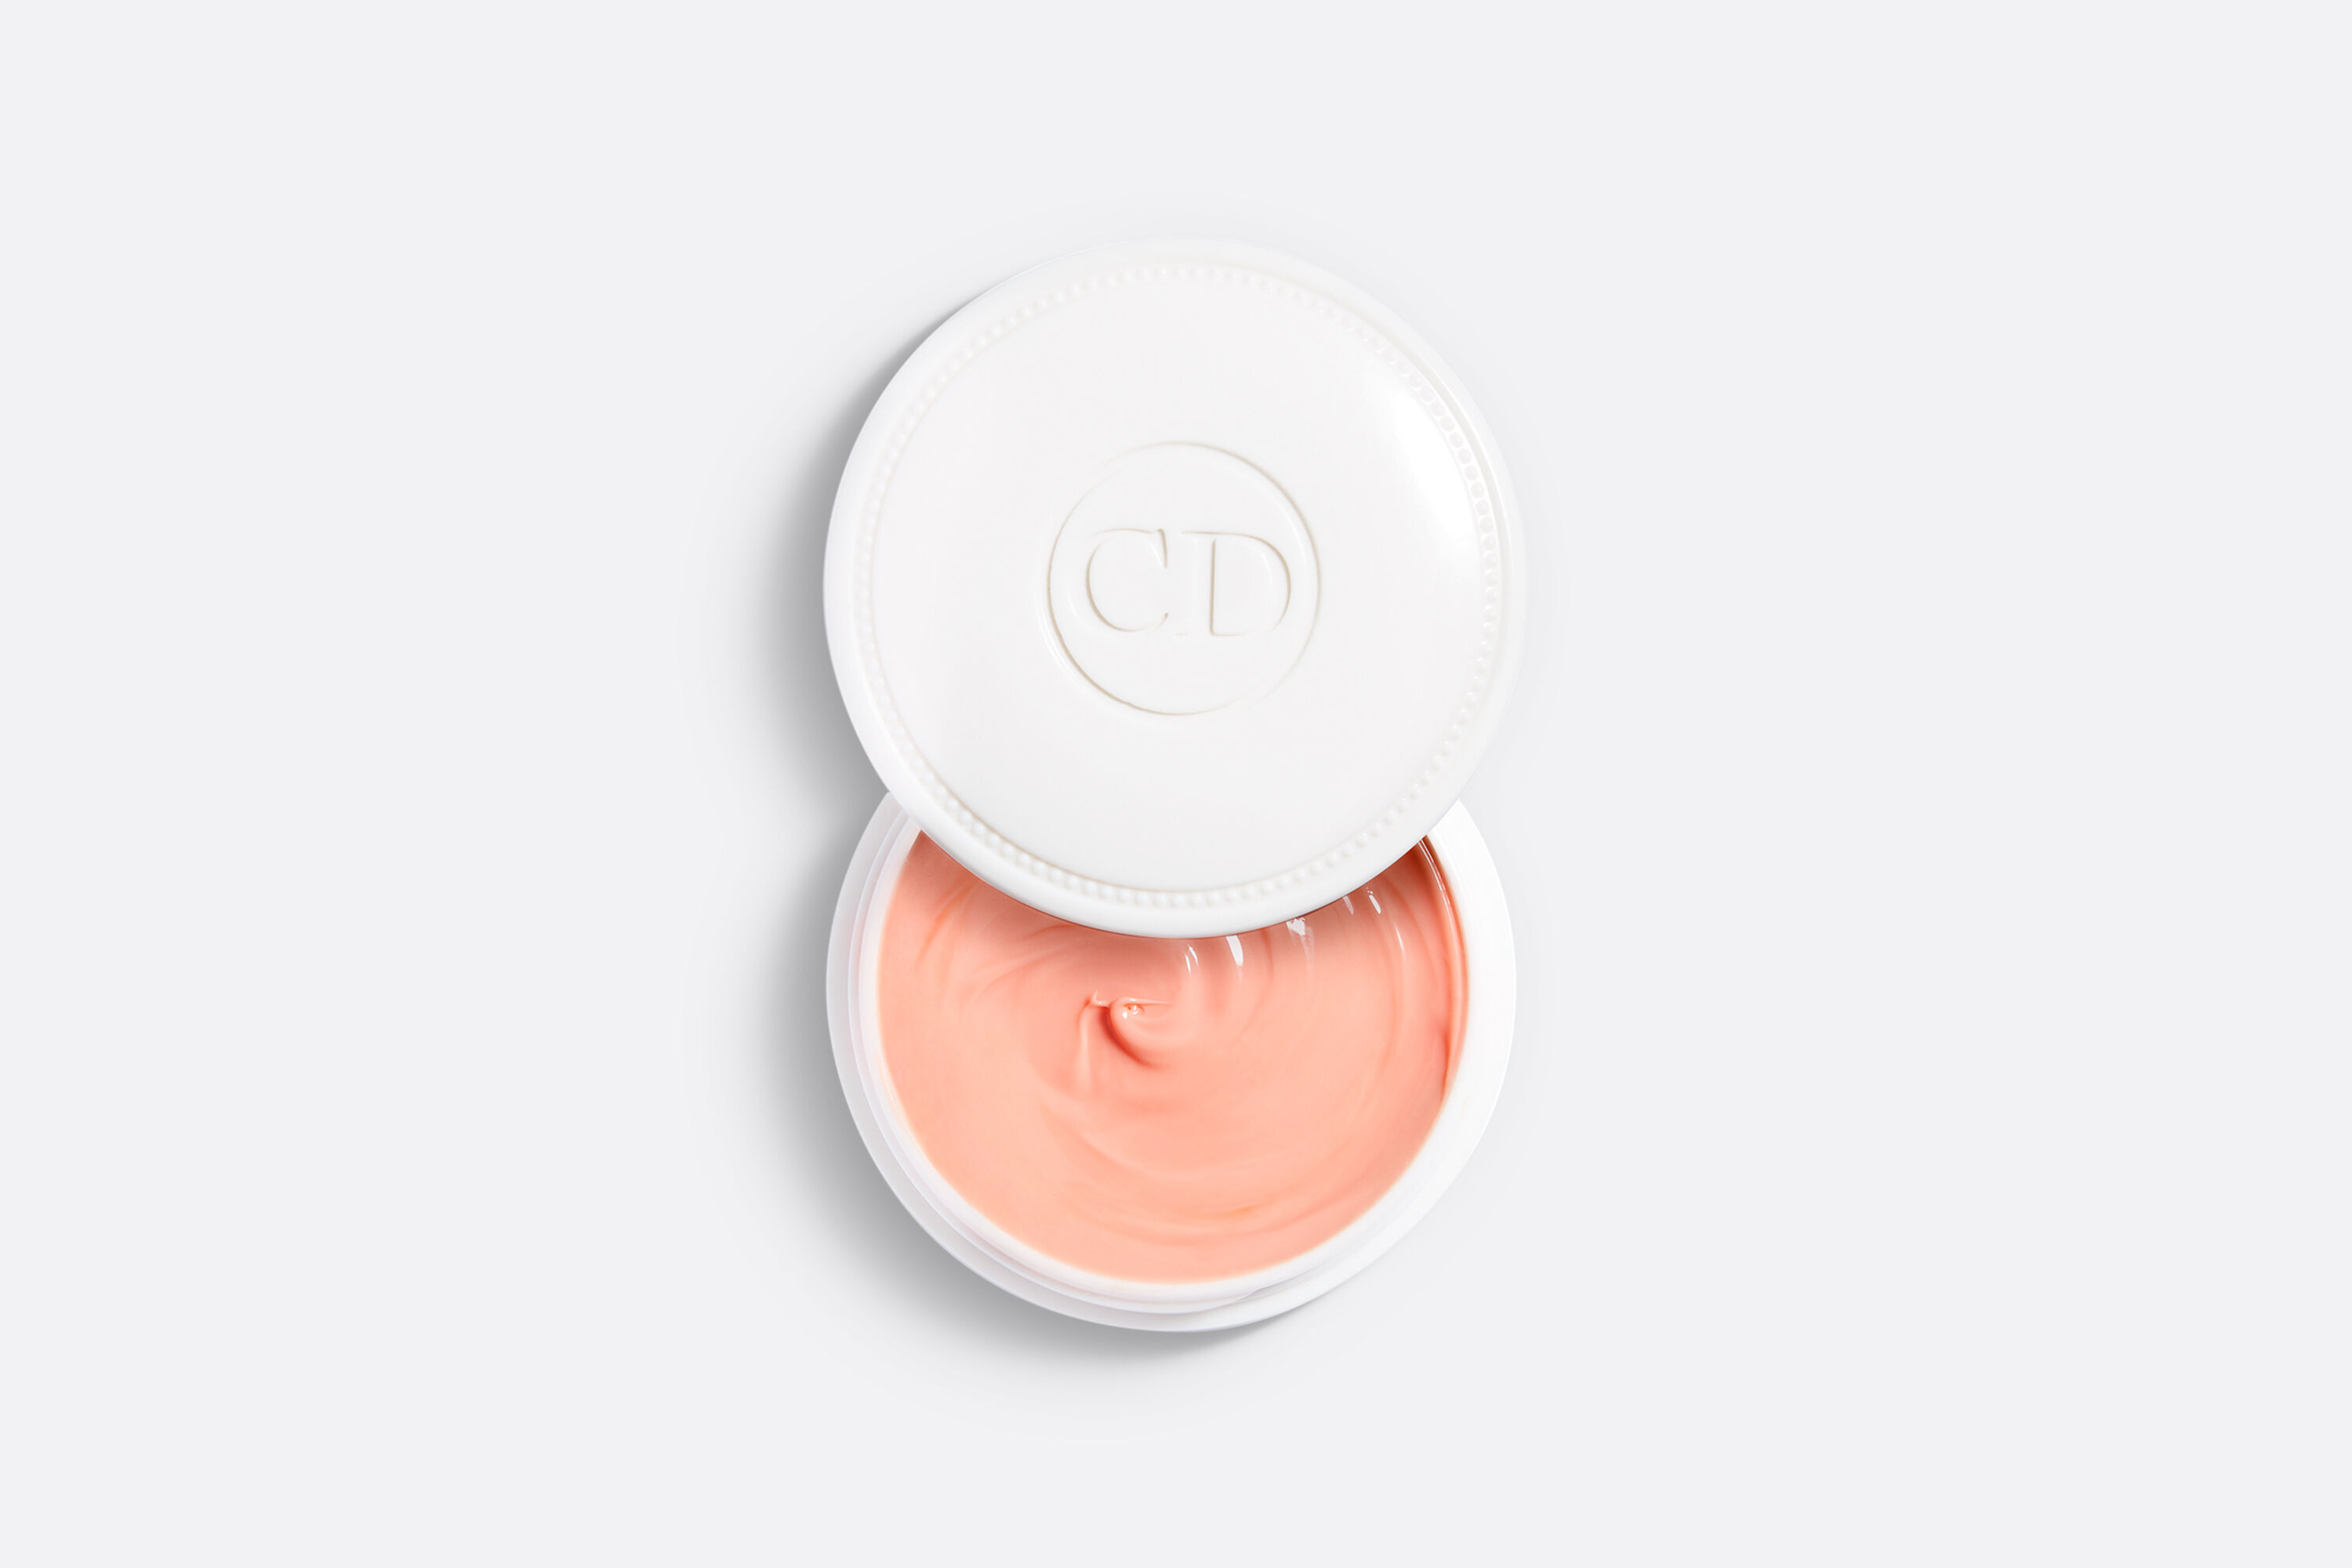 Christian Dior Creme Abricot Fortifying Cream For Nails